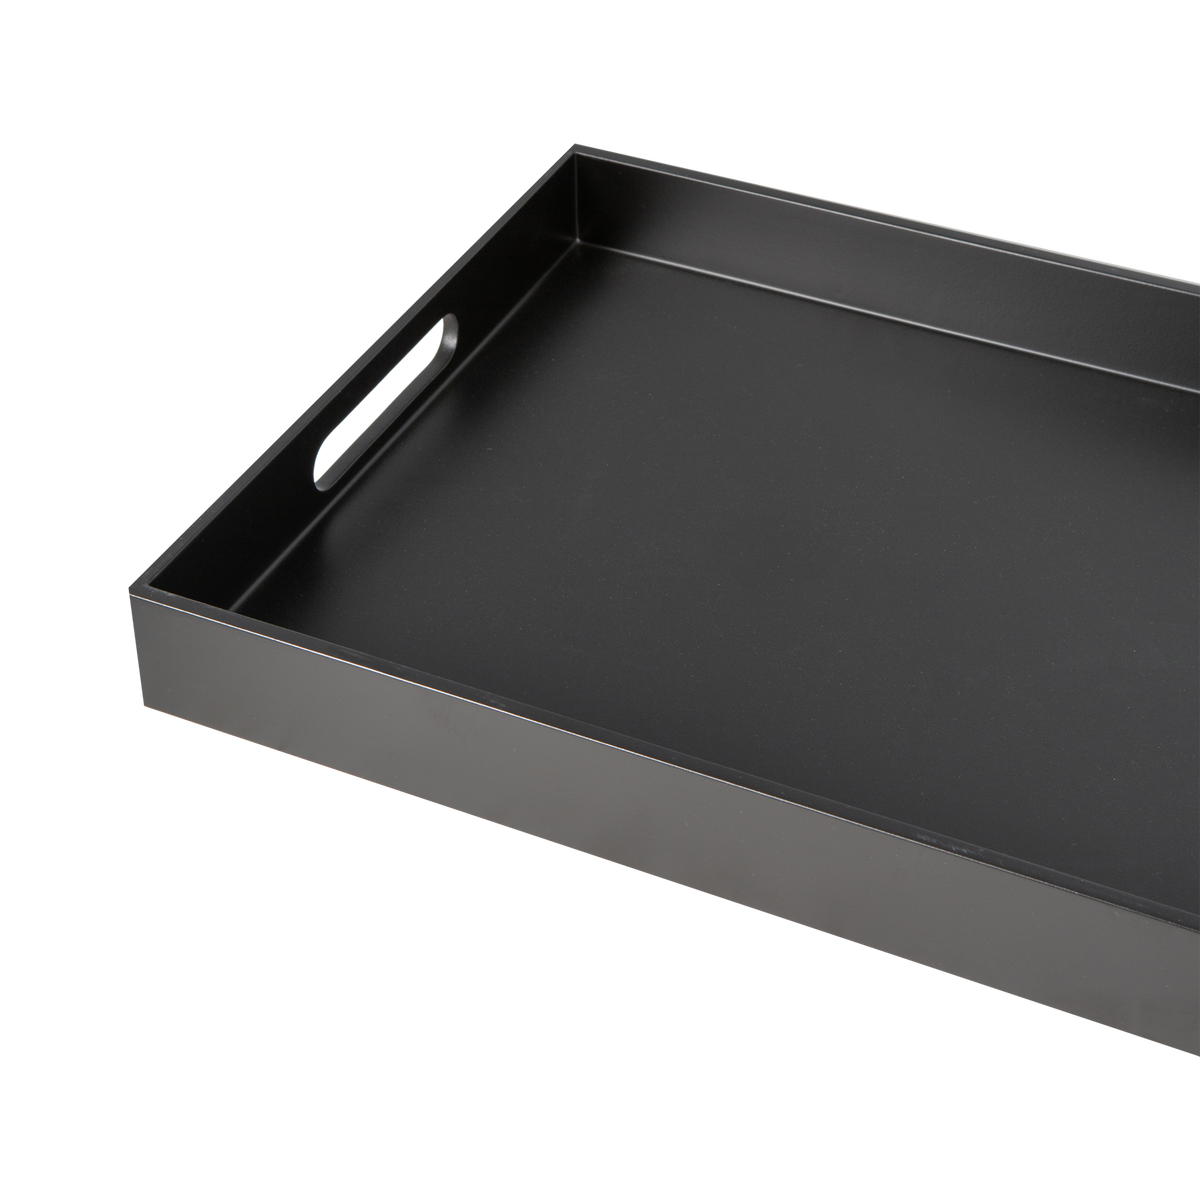 Ferris Lacquer Tray features a modern matte black finish and is available in two sizes.